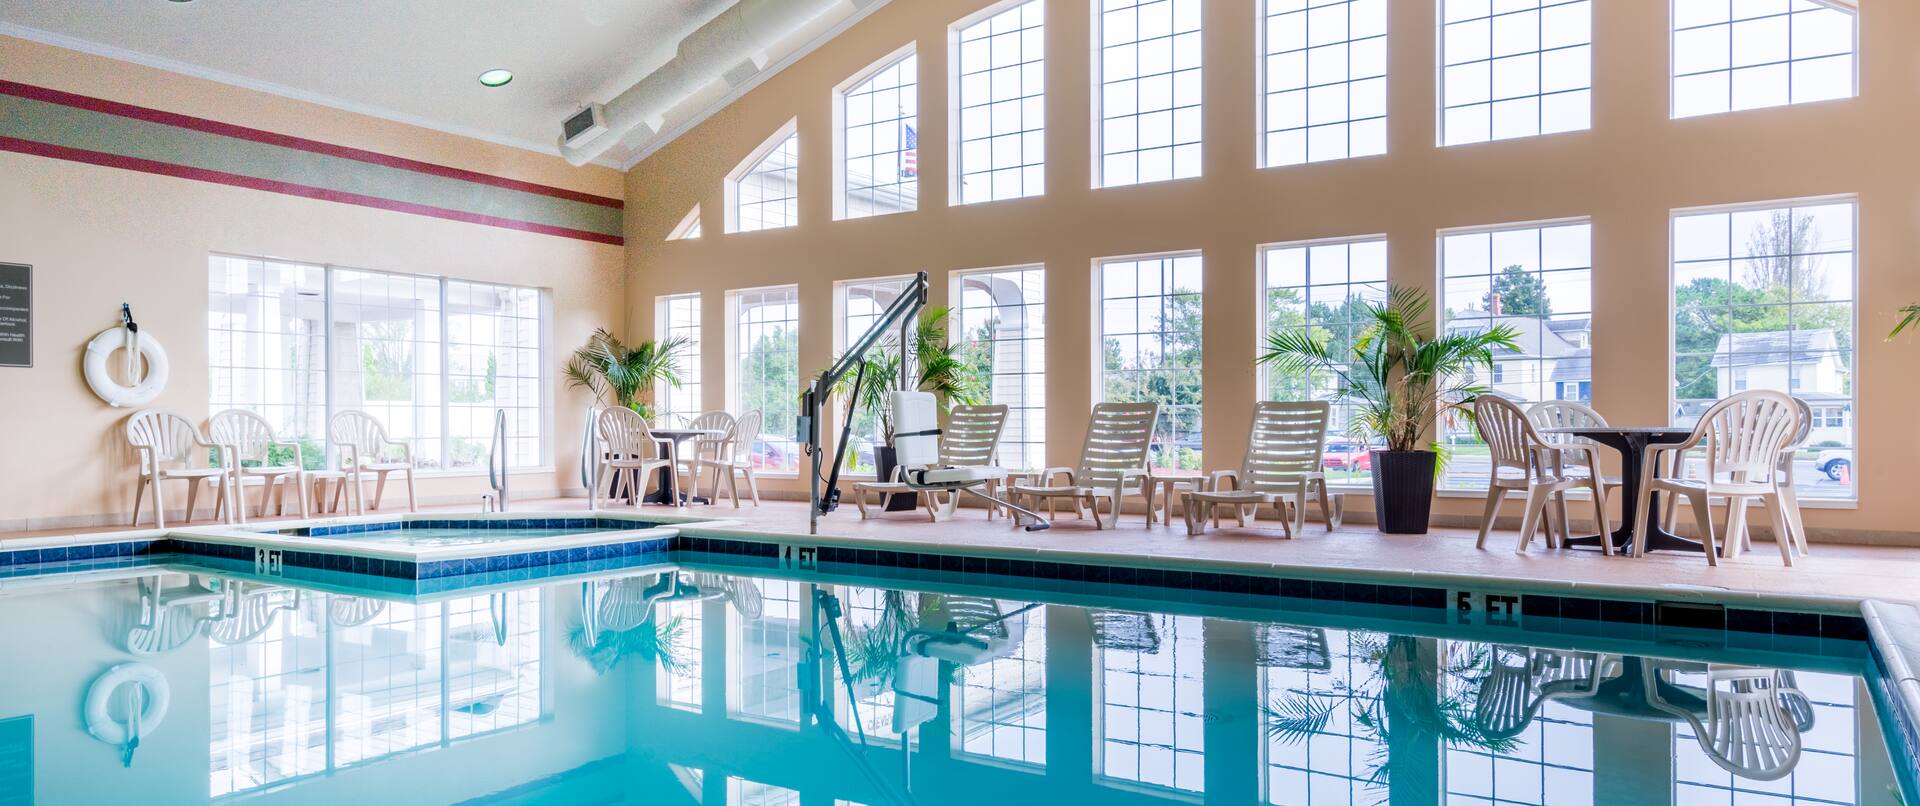 Indoor Pool with Lounge Chairs and Tables with Outside  View